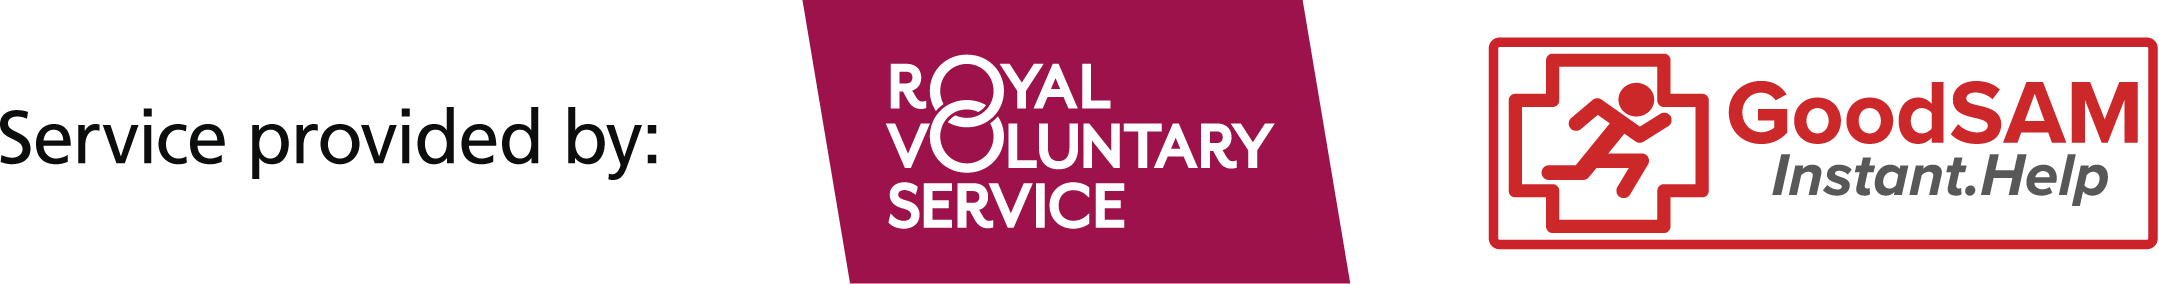 Service provided by Royal Voluntary Service and GoodSAM Instant Help